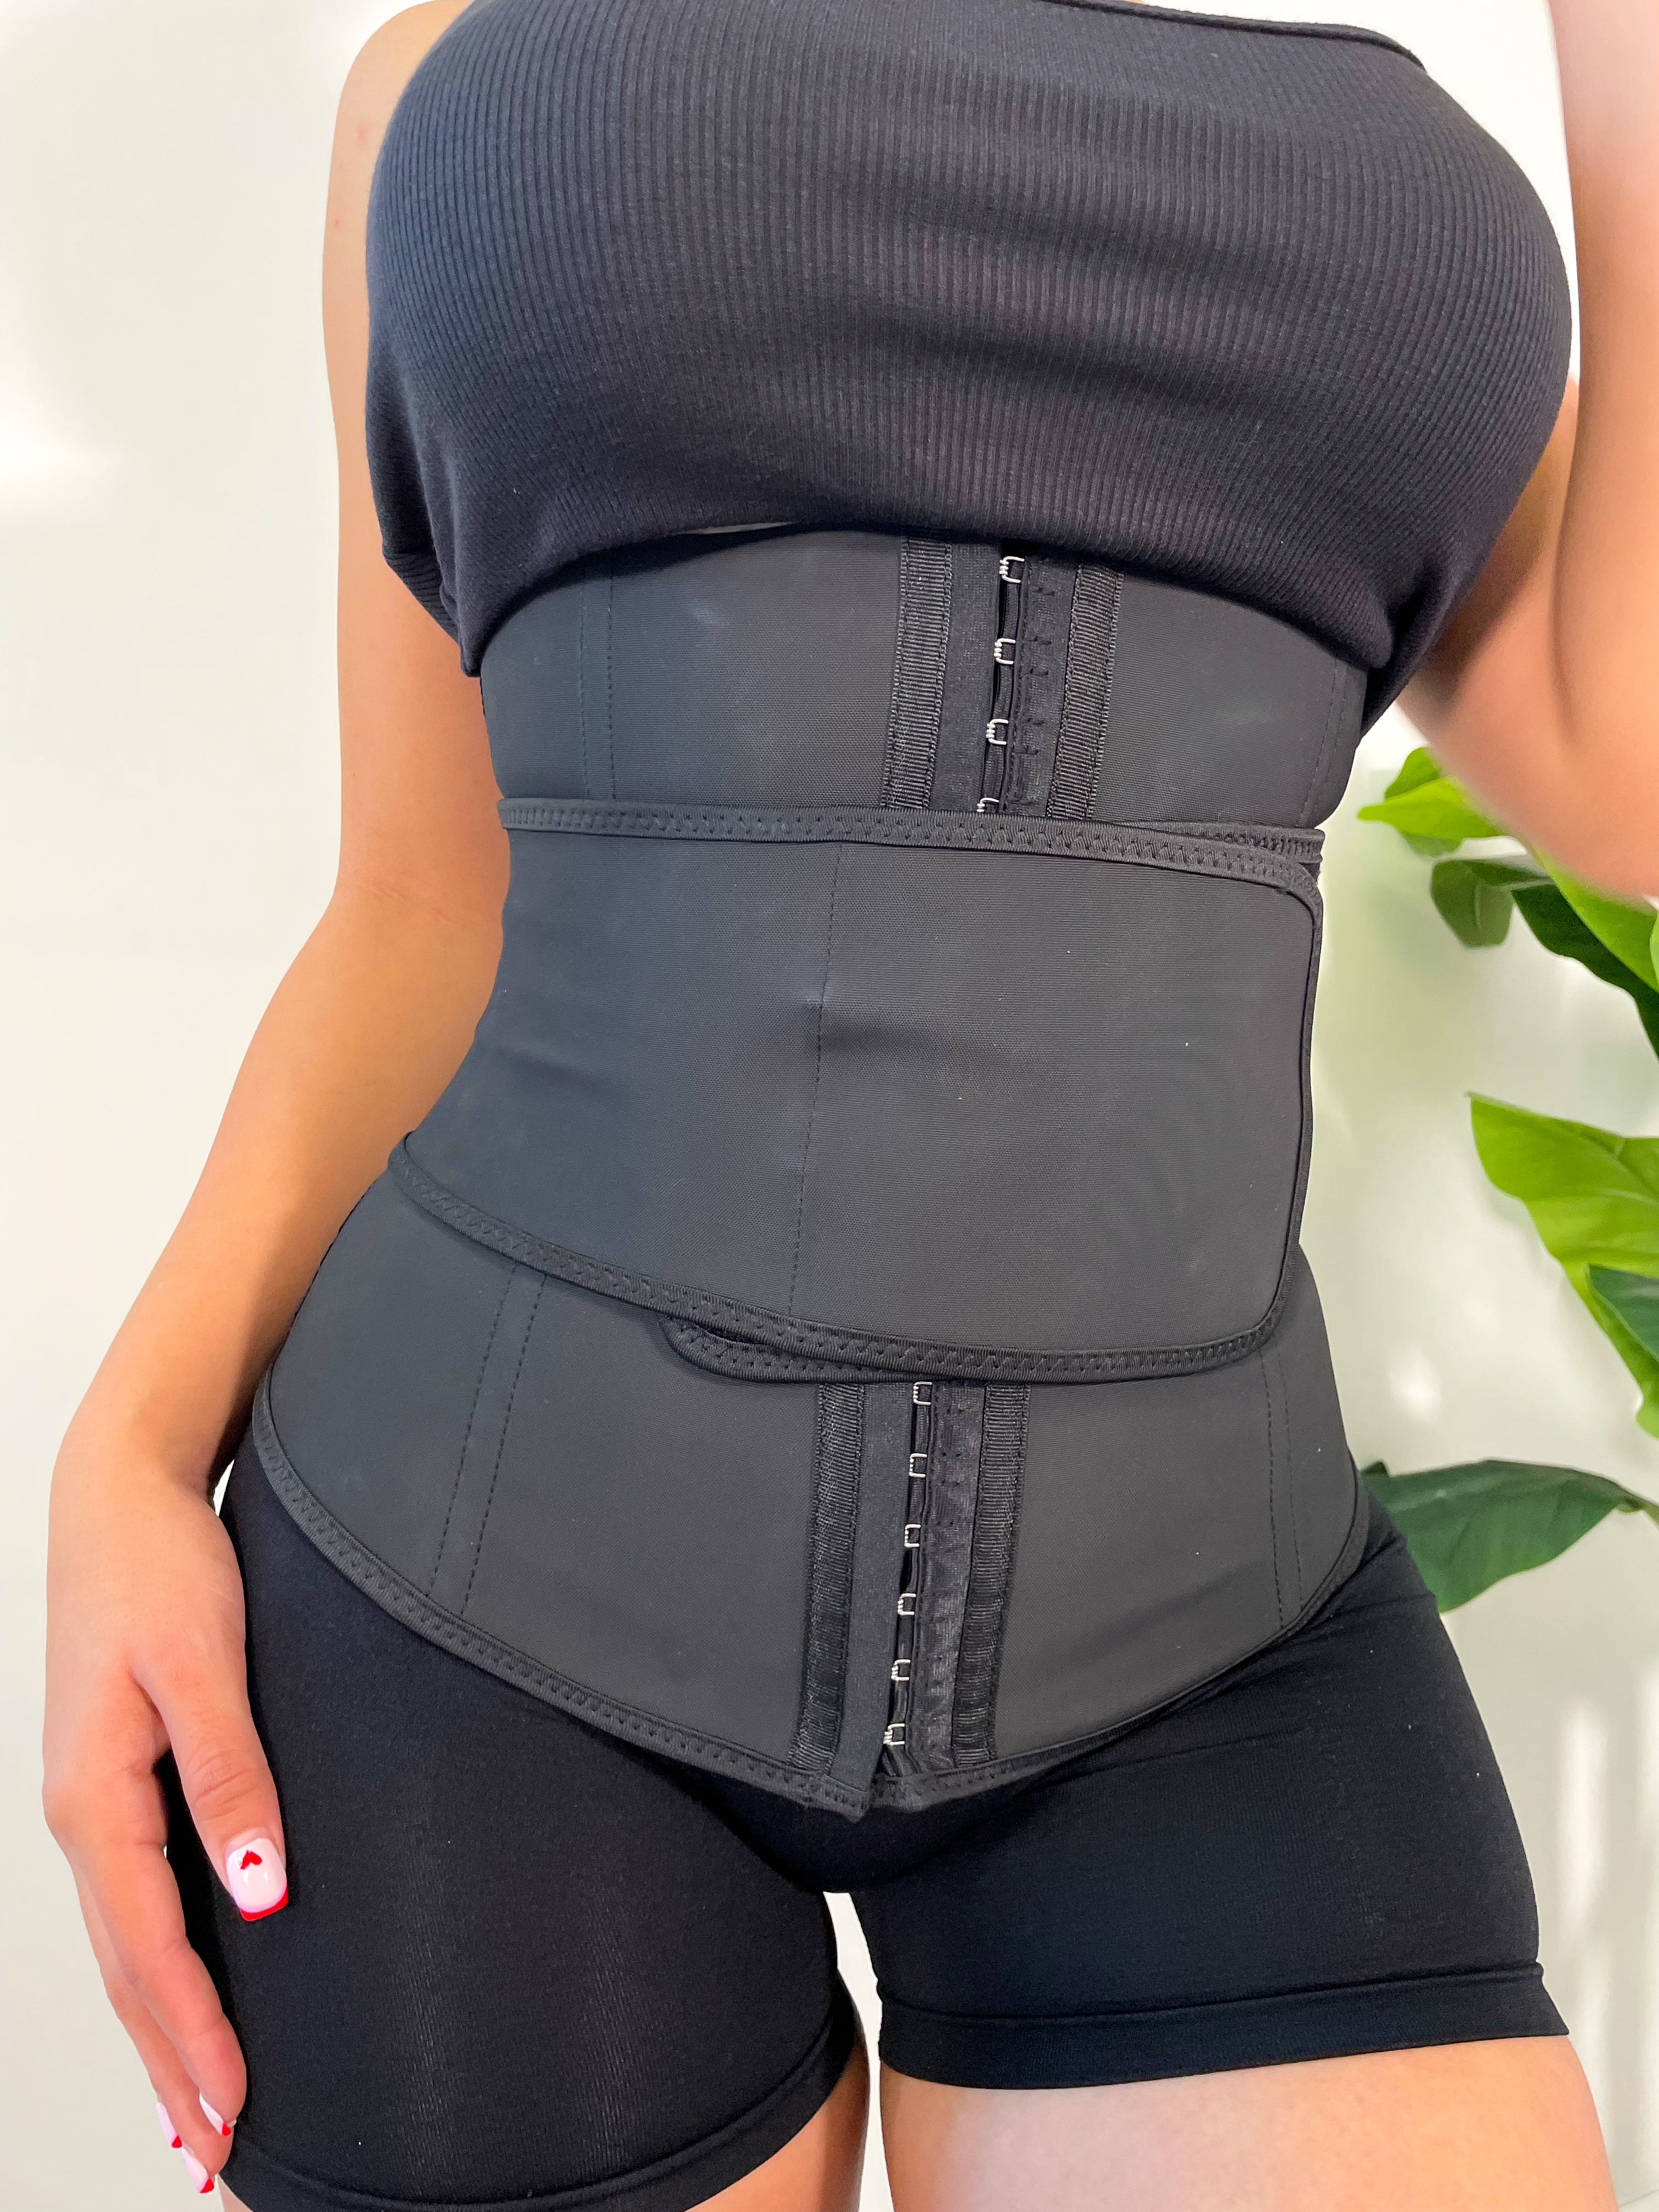 Stella's Corset - 😍Short Torso Latex Waist Trainer 😍starting at $59.00  👉Comment and then check your DM's! Size: 26, 28, 30, 32, 34, 36, 38, 40,  42, 44 Color: Black, Beige Short